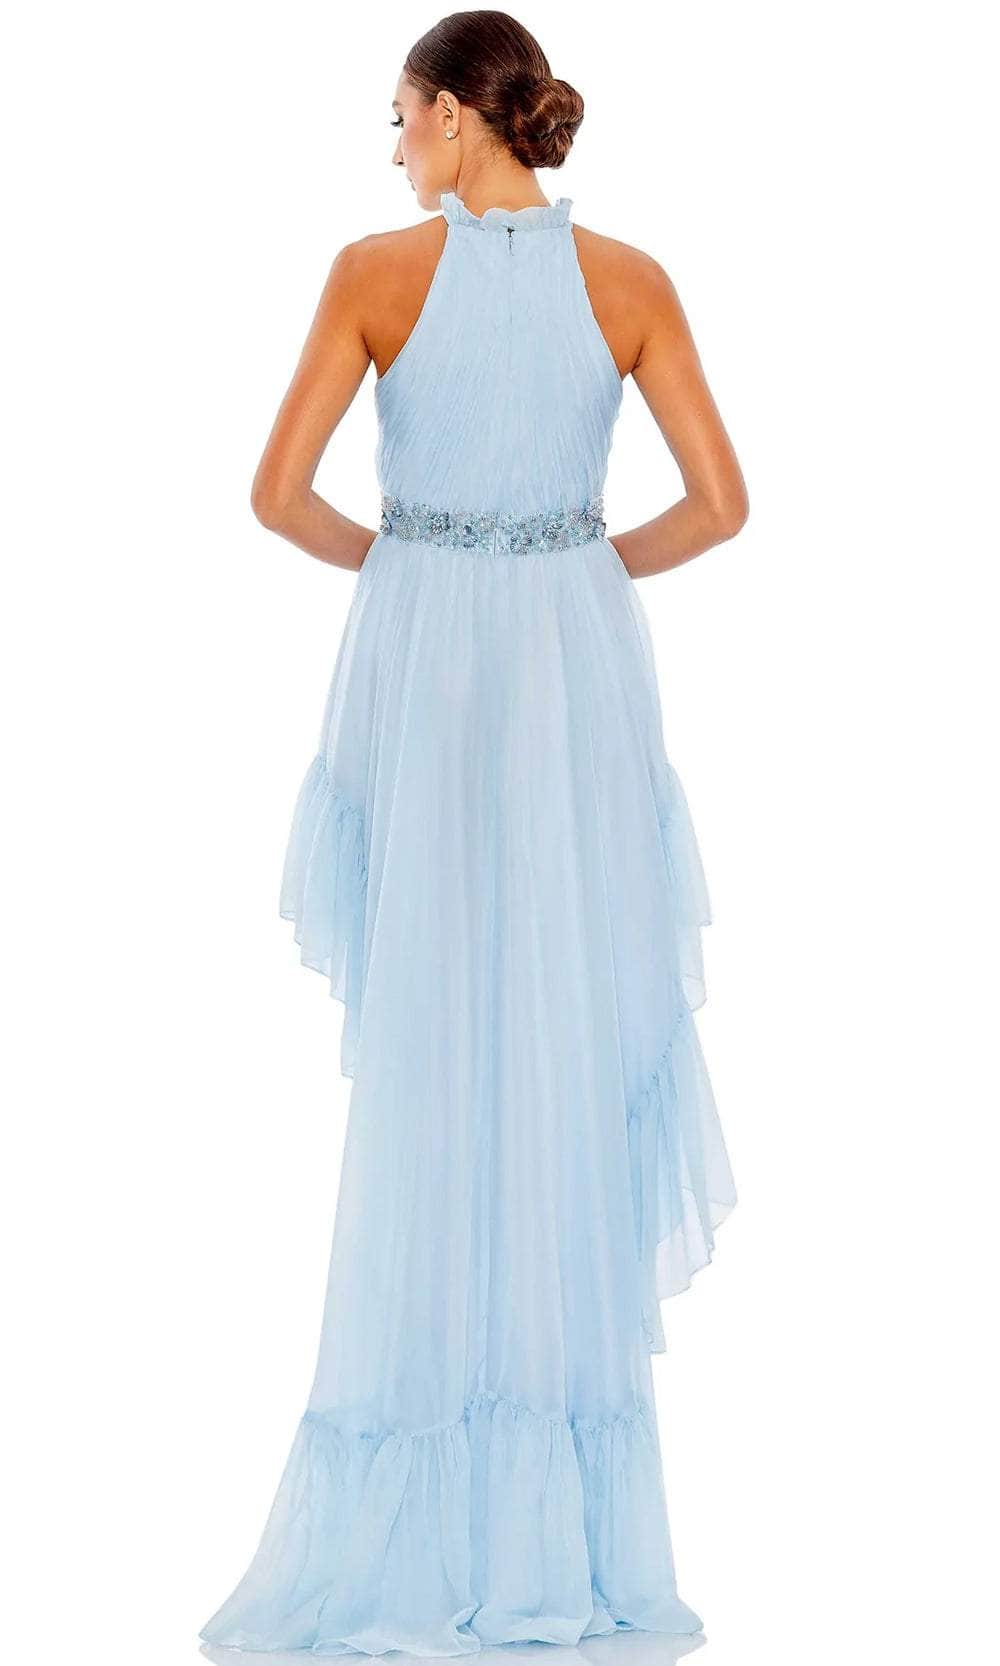 Sky Blue Beaded Halter Pageant Dress Brand New Size 10 for Kids